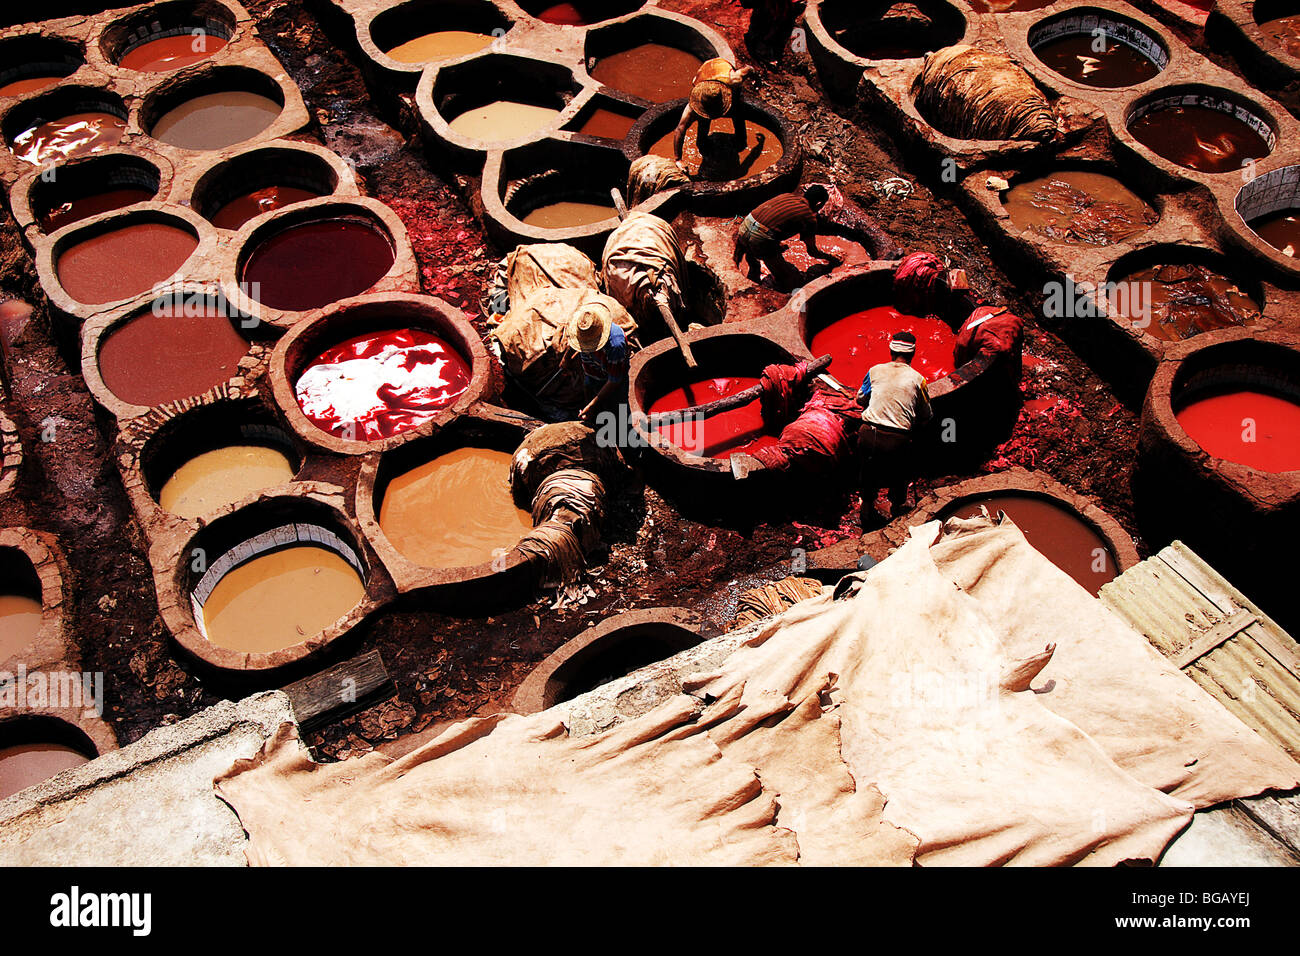 Leather tannery in Fes, Morocco 2 Stock Photo